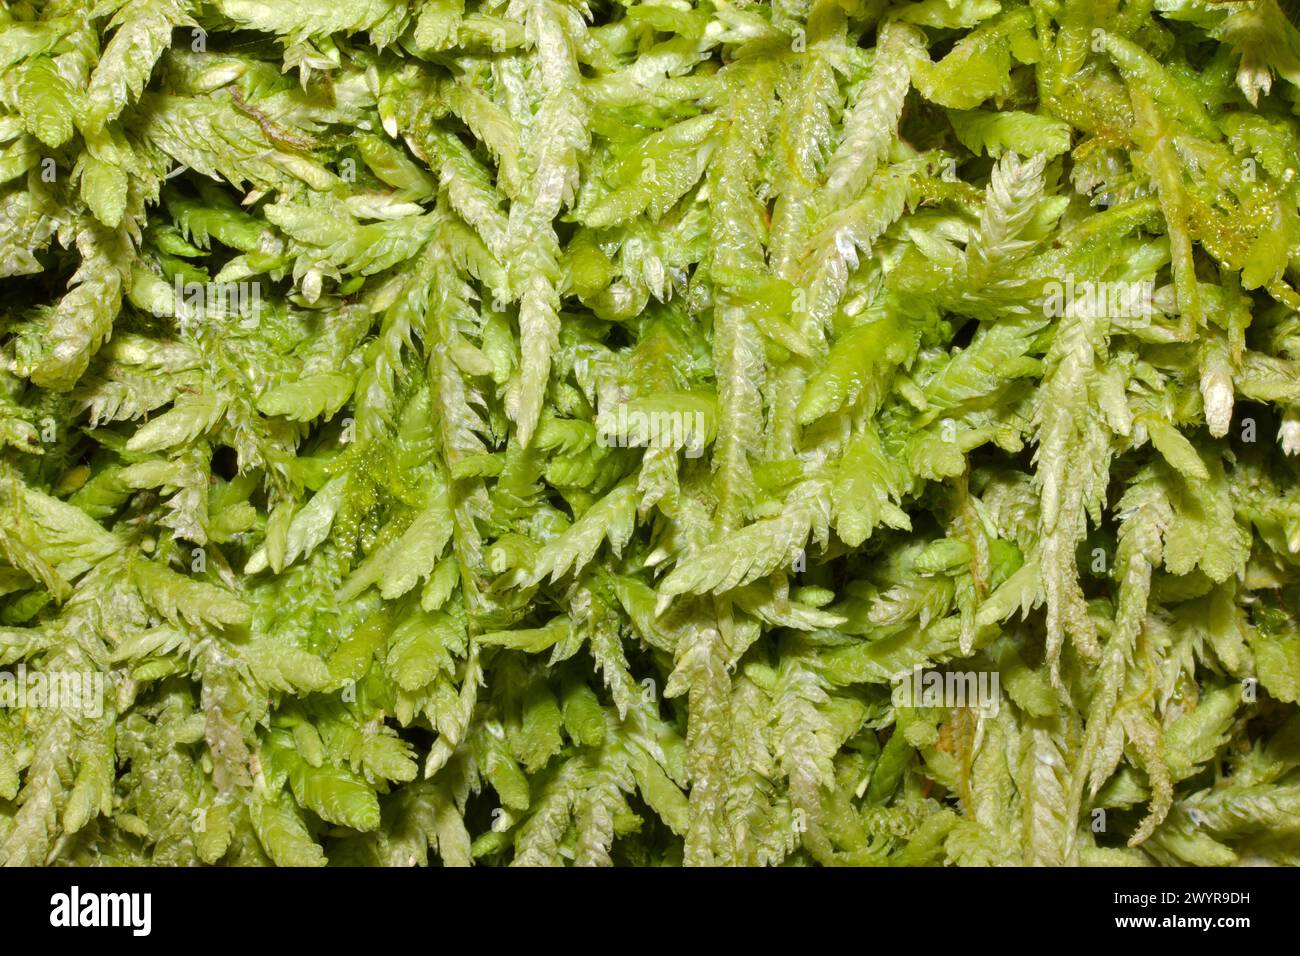 Plagiothecium undulatum (wavy-leaved cotton moss) is found in acidic soil and on wood and rocks. It is common in the UK. Stock Photo